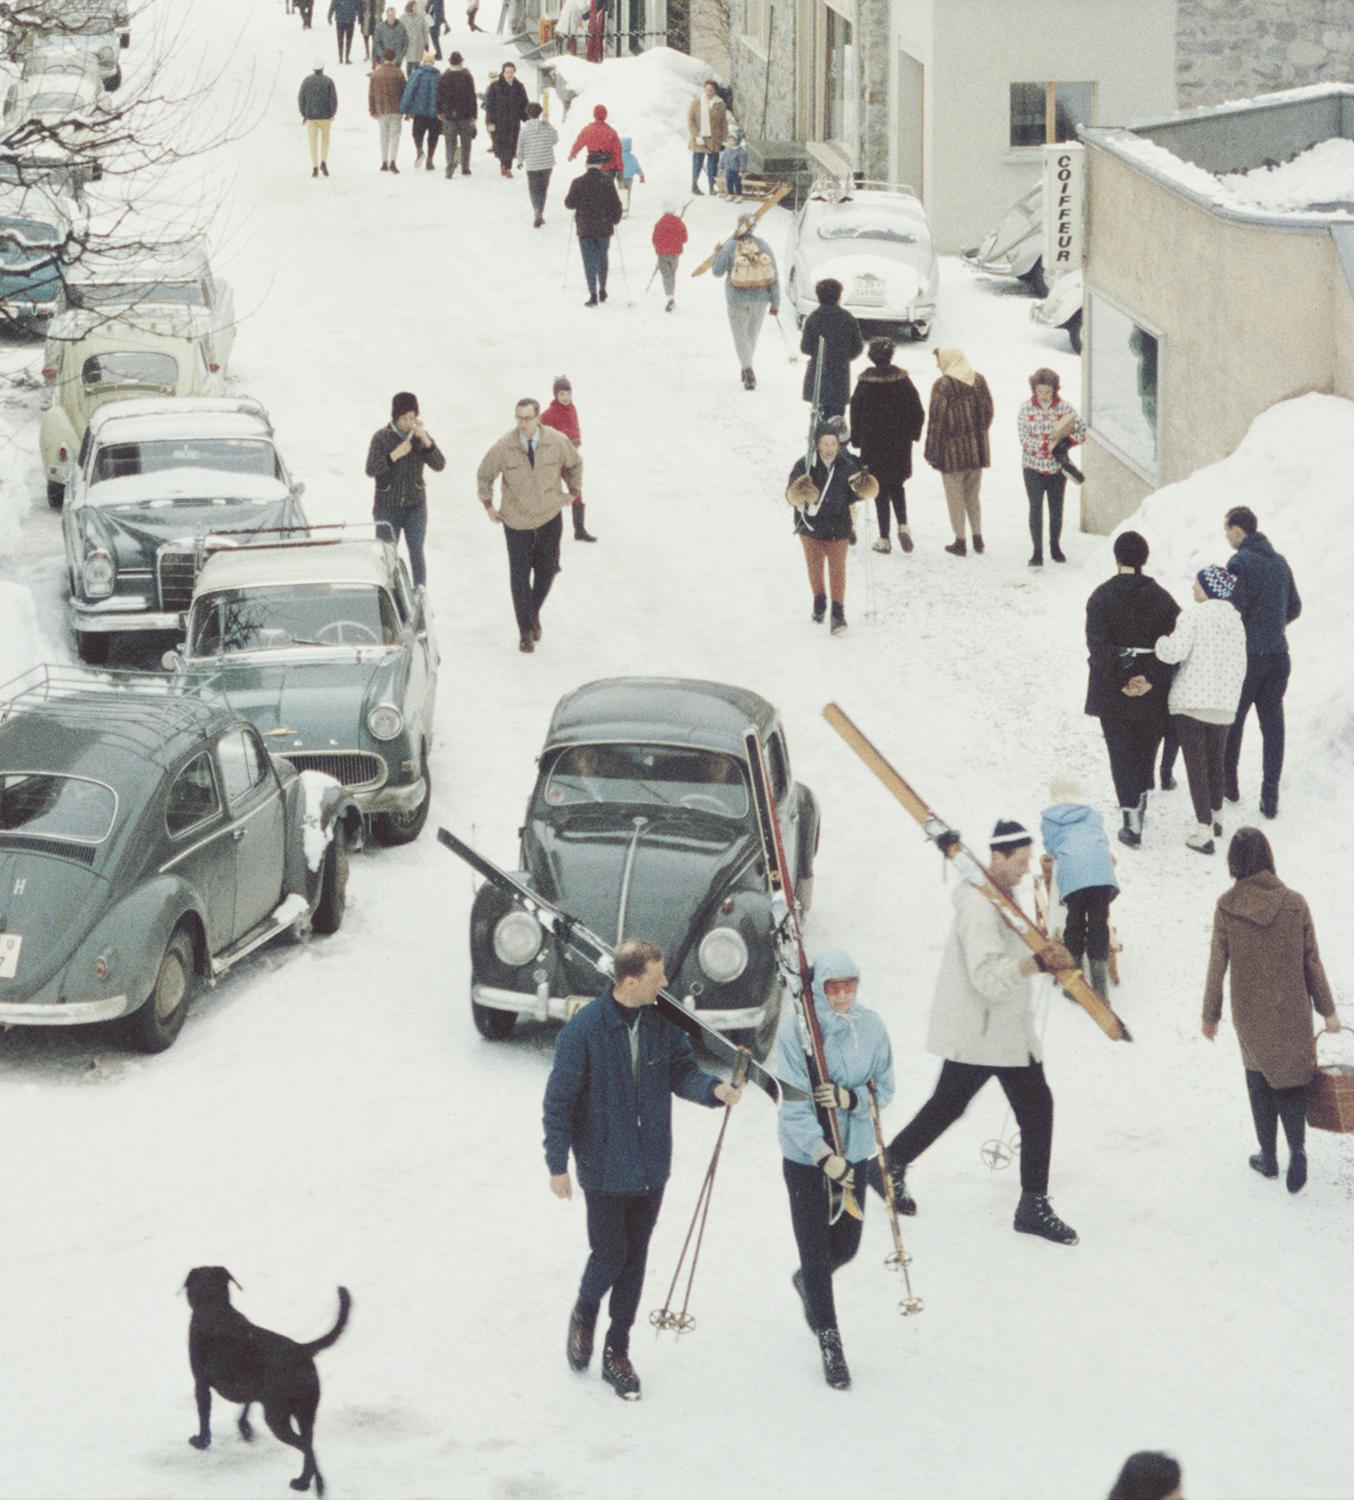 Klosters 1963 Slim Aarons

Skiers pass by the Hotel Chesa Grischuna in Klosters, 1963.

Skiers walk past the hotel and along the snow covered road carrying skis on their shoulders. The road is lined with classic and vintage cars of the era and